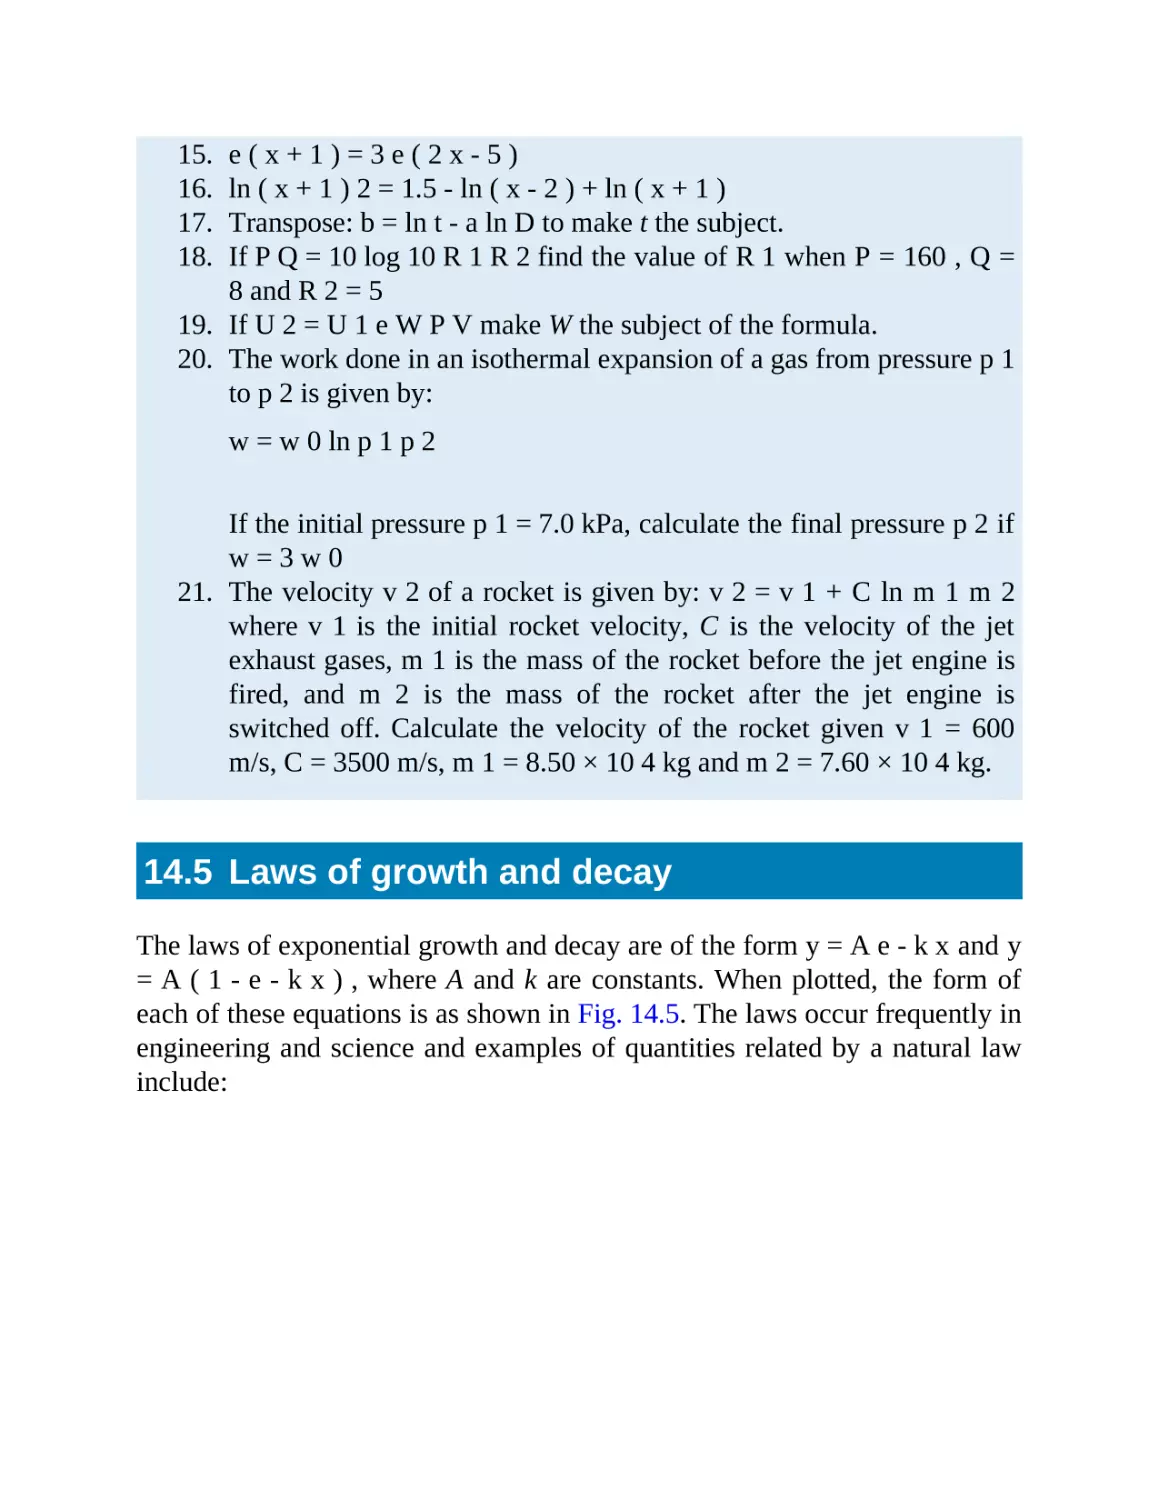 14.5 Laws of growth and decay